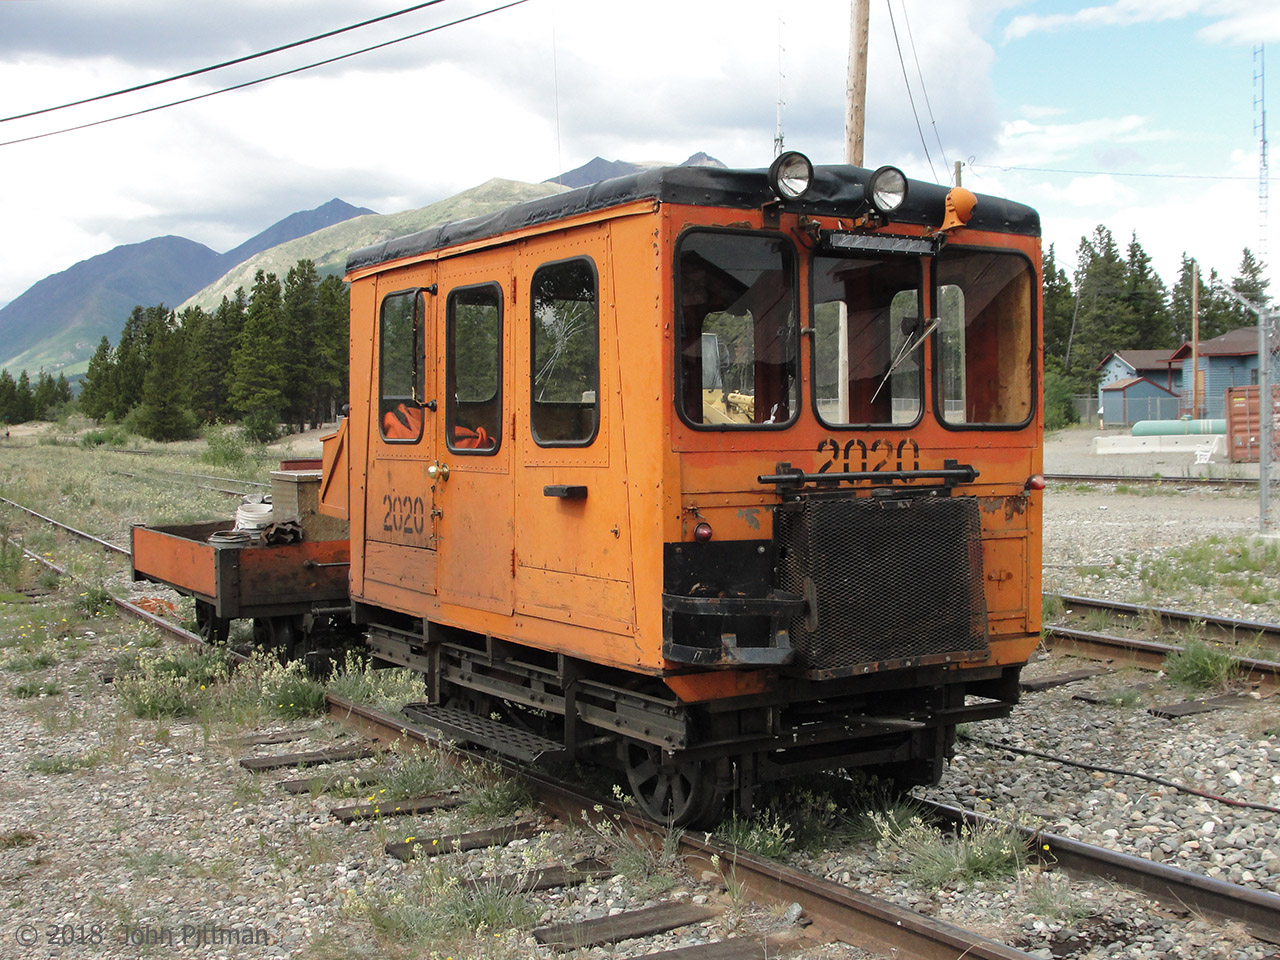 I was still down in Skagway when the 5 days a week WP&YR passenger train to Carcross was laying over from 12:30 to 1PM.
However I found this Fairmont A6-F4-1 track gang car with trailer, asleep a few tenths beyond Carcross station on the otherwise out-of-service track leading to Whitehorse. Purchased new by WP&YR in 1976, this Ford powered  gas-mechanical speeder apparently continues to be used as needed. 
Fairmont closed down their business by 1979; I expect this is one of the last built for 3 foot gauge track. Can't be many railways with operational Fairmont speeders nowadays. Hi-rail pickup trucks are more versatile - they are a good fit for standard gauge track, but not narrow gauges.